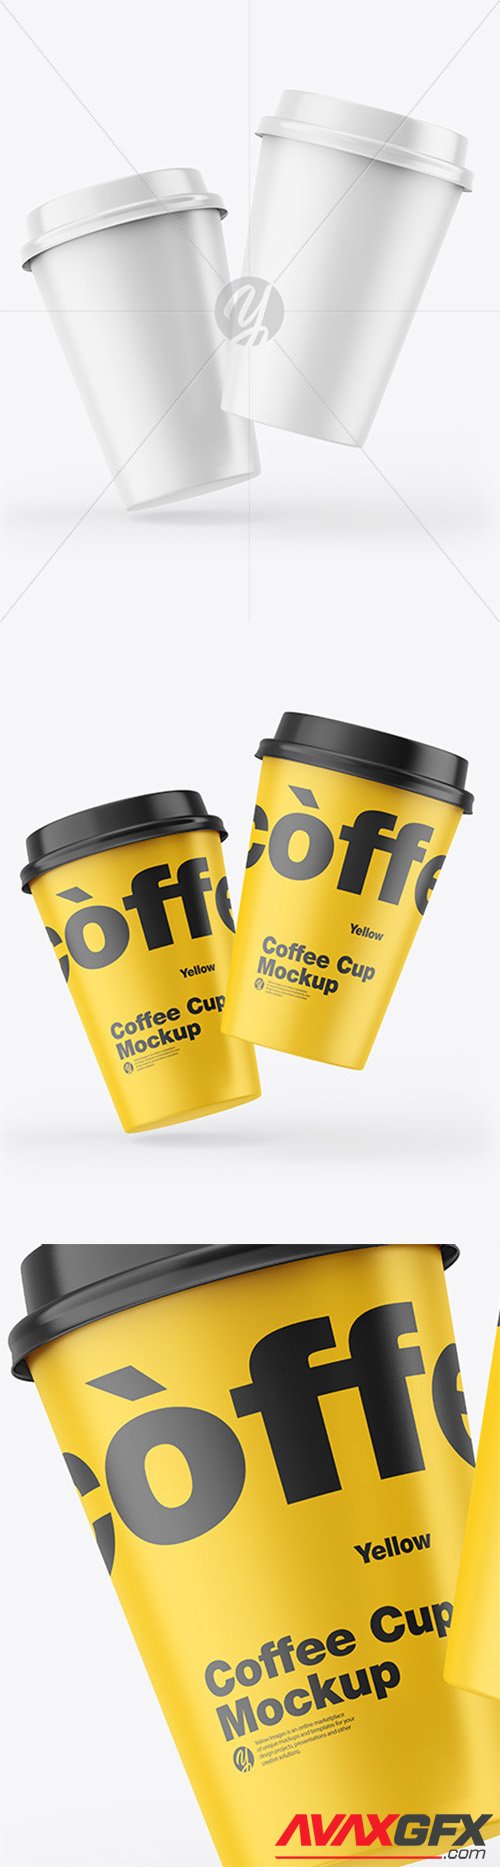 Download Matte Coffee Cups Mockup 55462 Avaxgfx All Downloads That You Need In One Place Graphic From Nitroflare Rapidgator